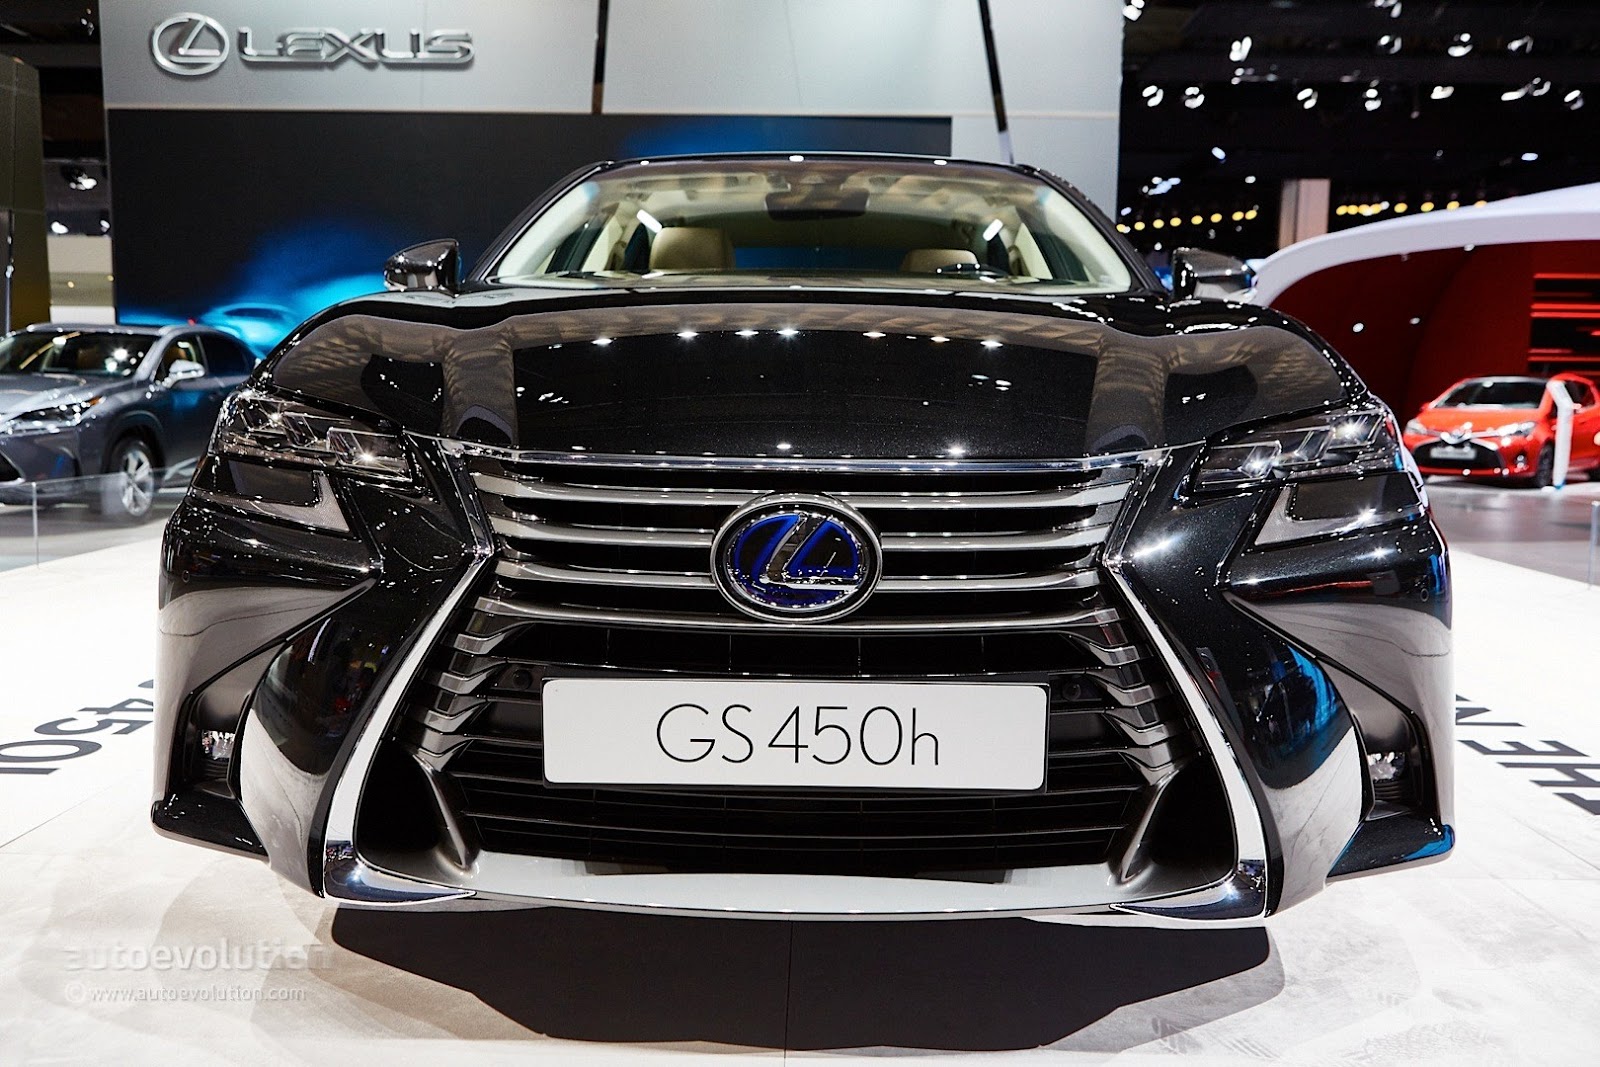 Best Luxury Hybrid Cars - 2018 Lexus GS 450h F-Sport with V6 Engine and